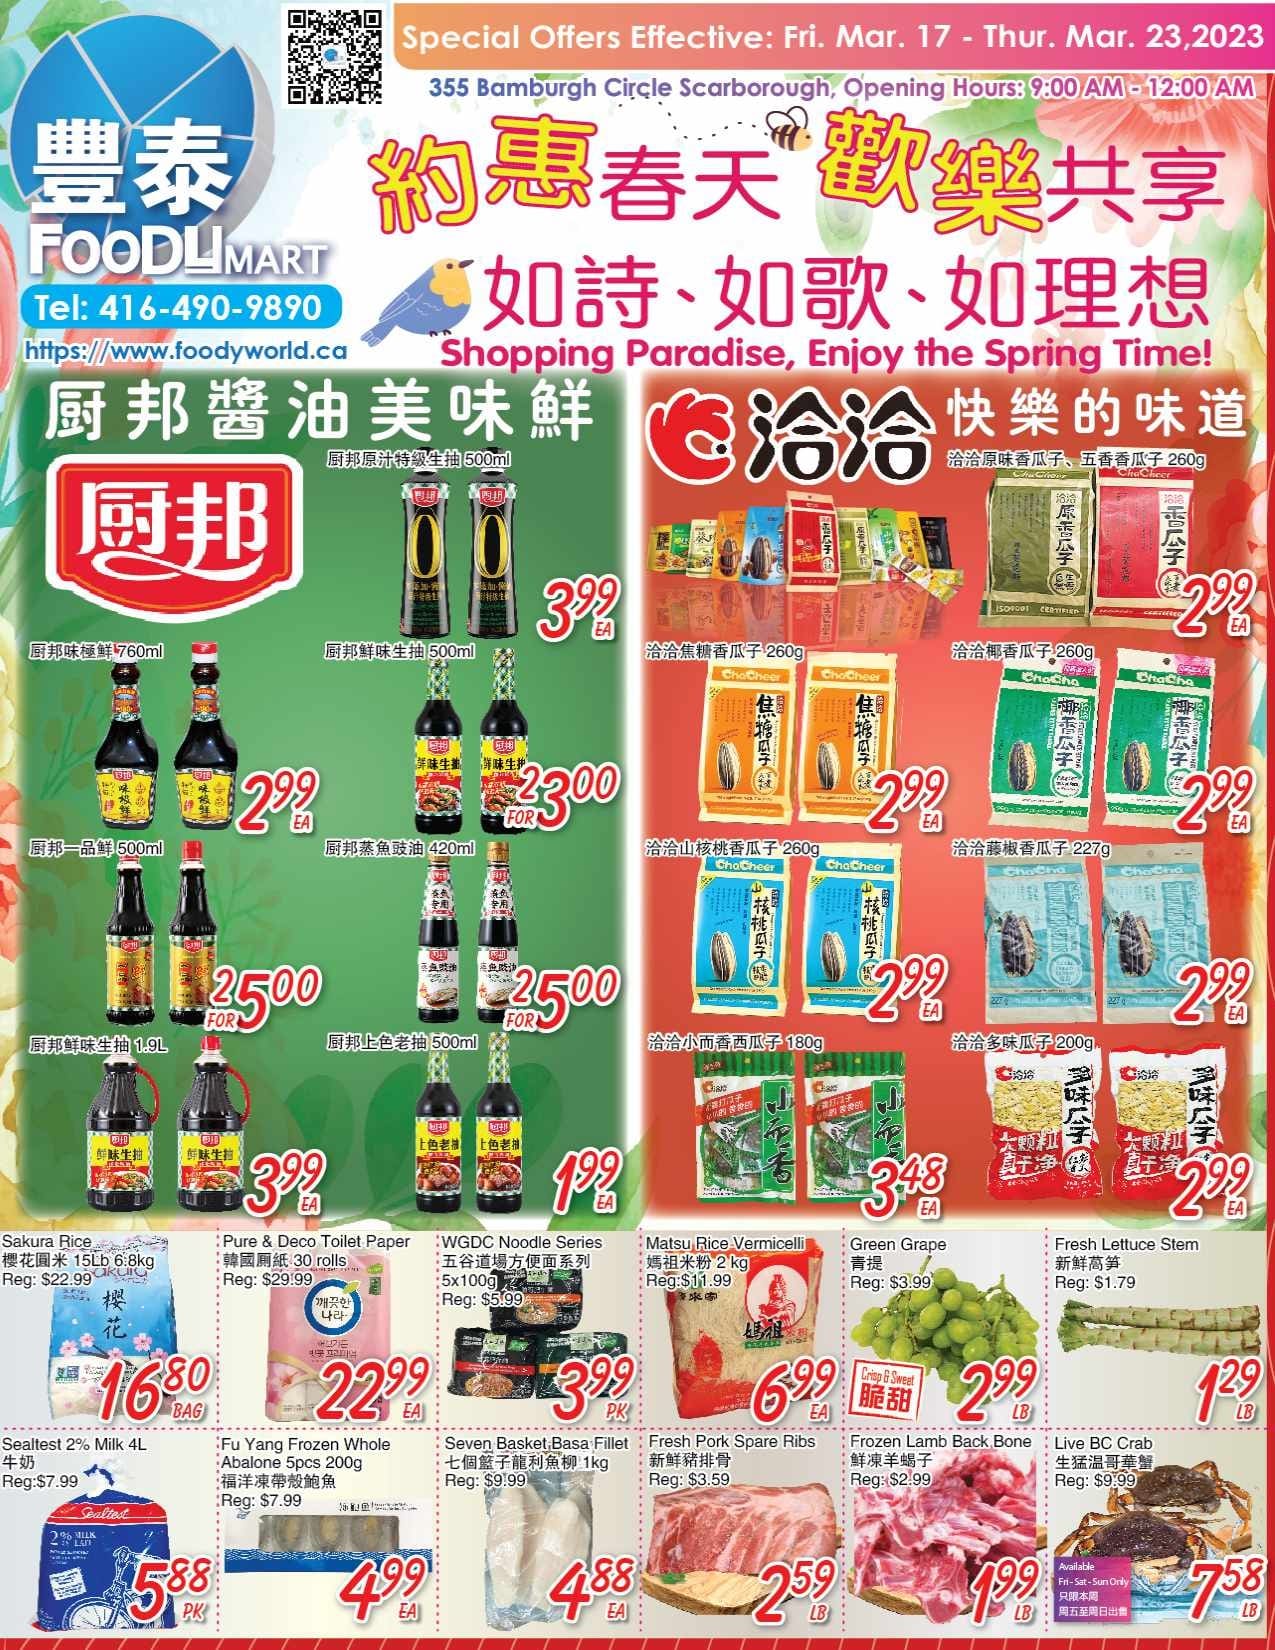 Foody Mart - Weekly Flyer Specials - Page 1